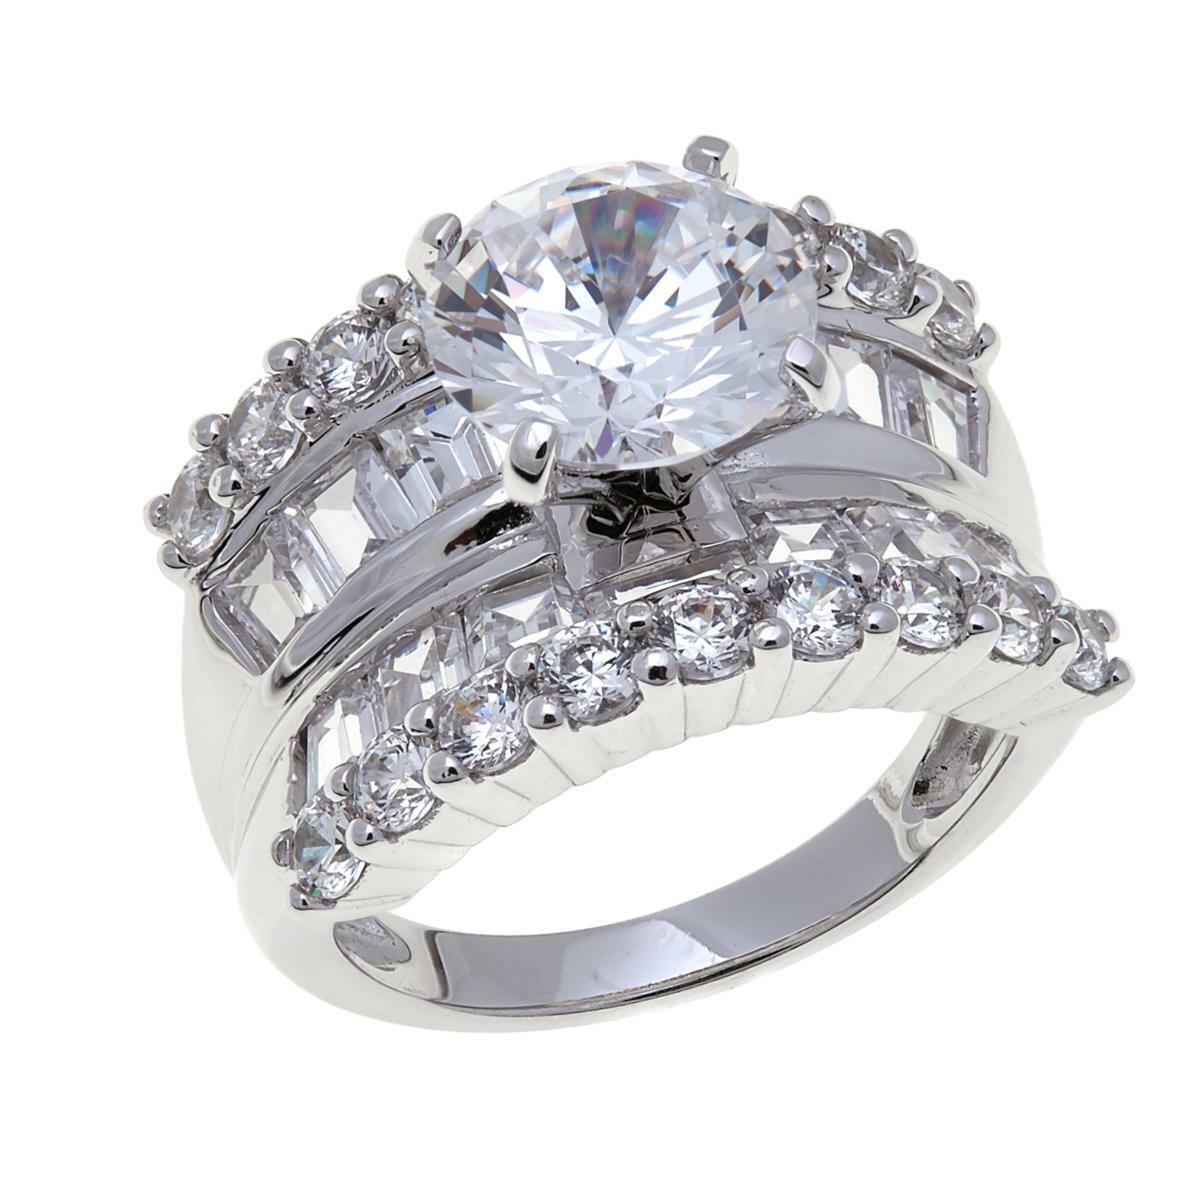 5.66ctw Absolute Round Cubic Zirconia & Multi-Shape Ring Size 6 HSN $70